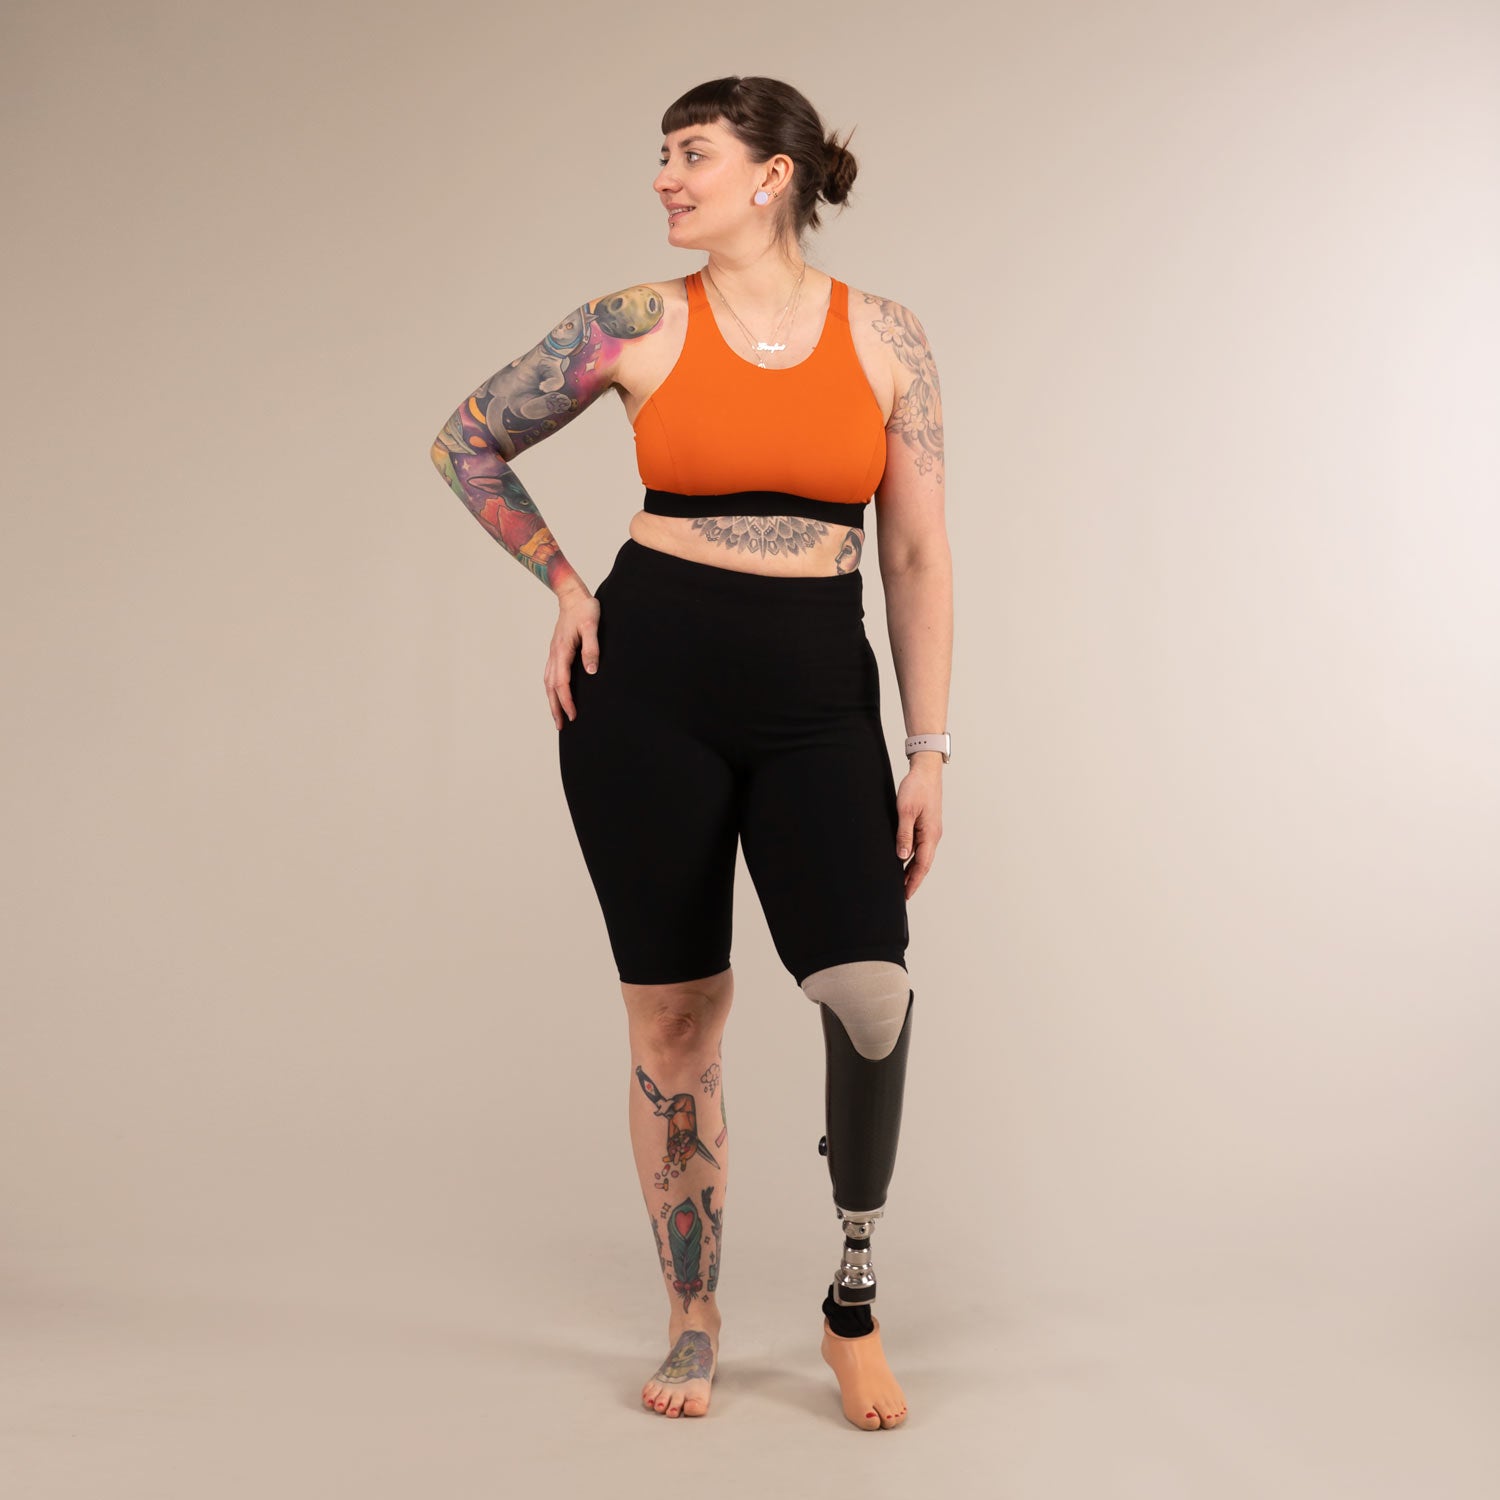 EQUINOX MINIMAL REPTILE | Reversible Recycled Sports Bra | 3RD ROCK Clothing -  Laura is a 32E with a 30"underbust, 36" overbust and wears a size 14 F